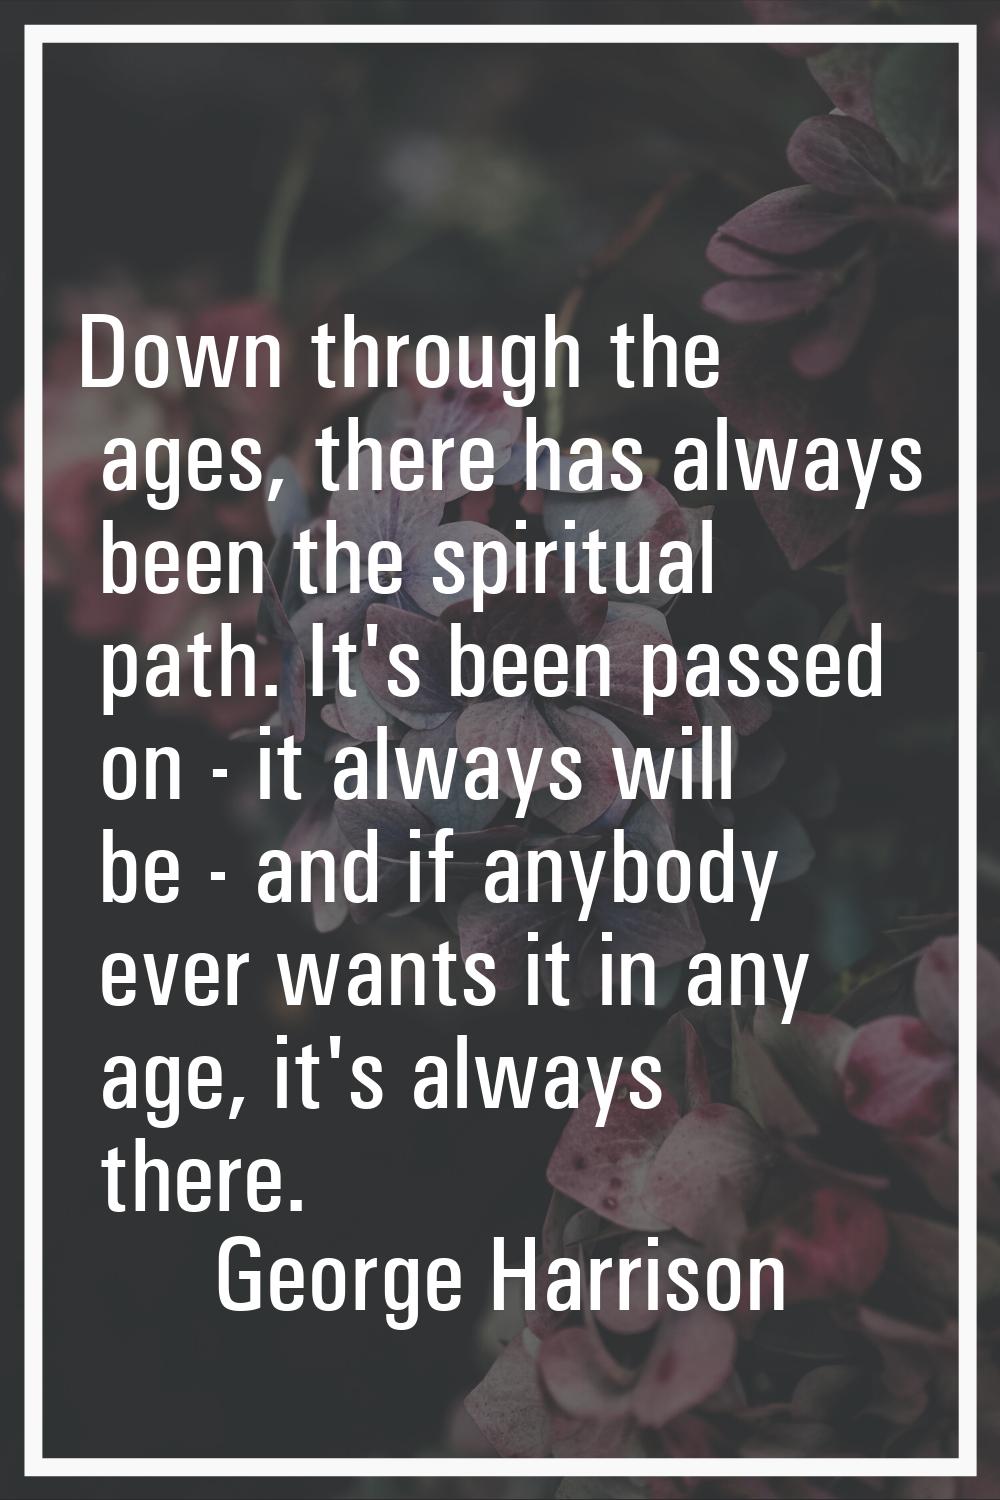 Down through the ages, there has always been the spiritual path. It's been passed on - it always wi